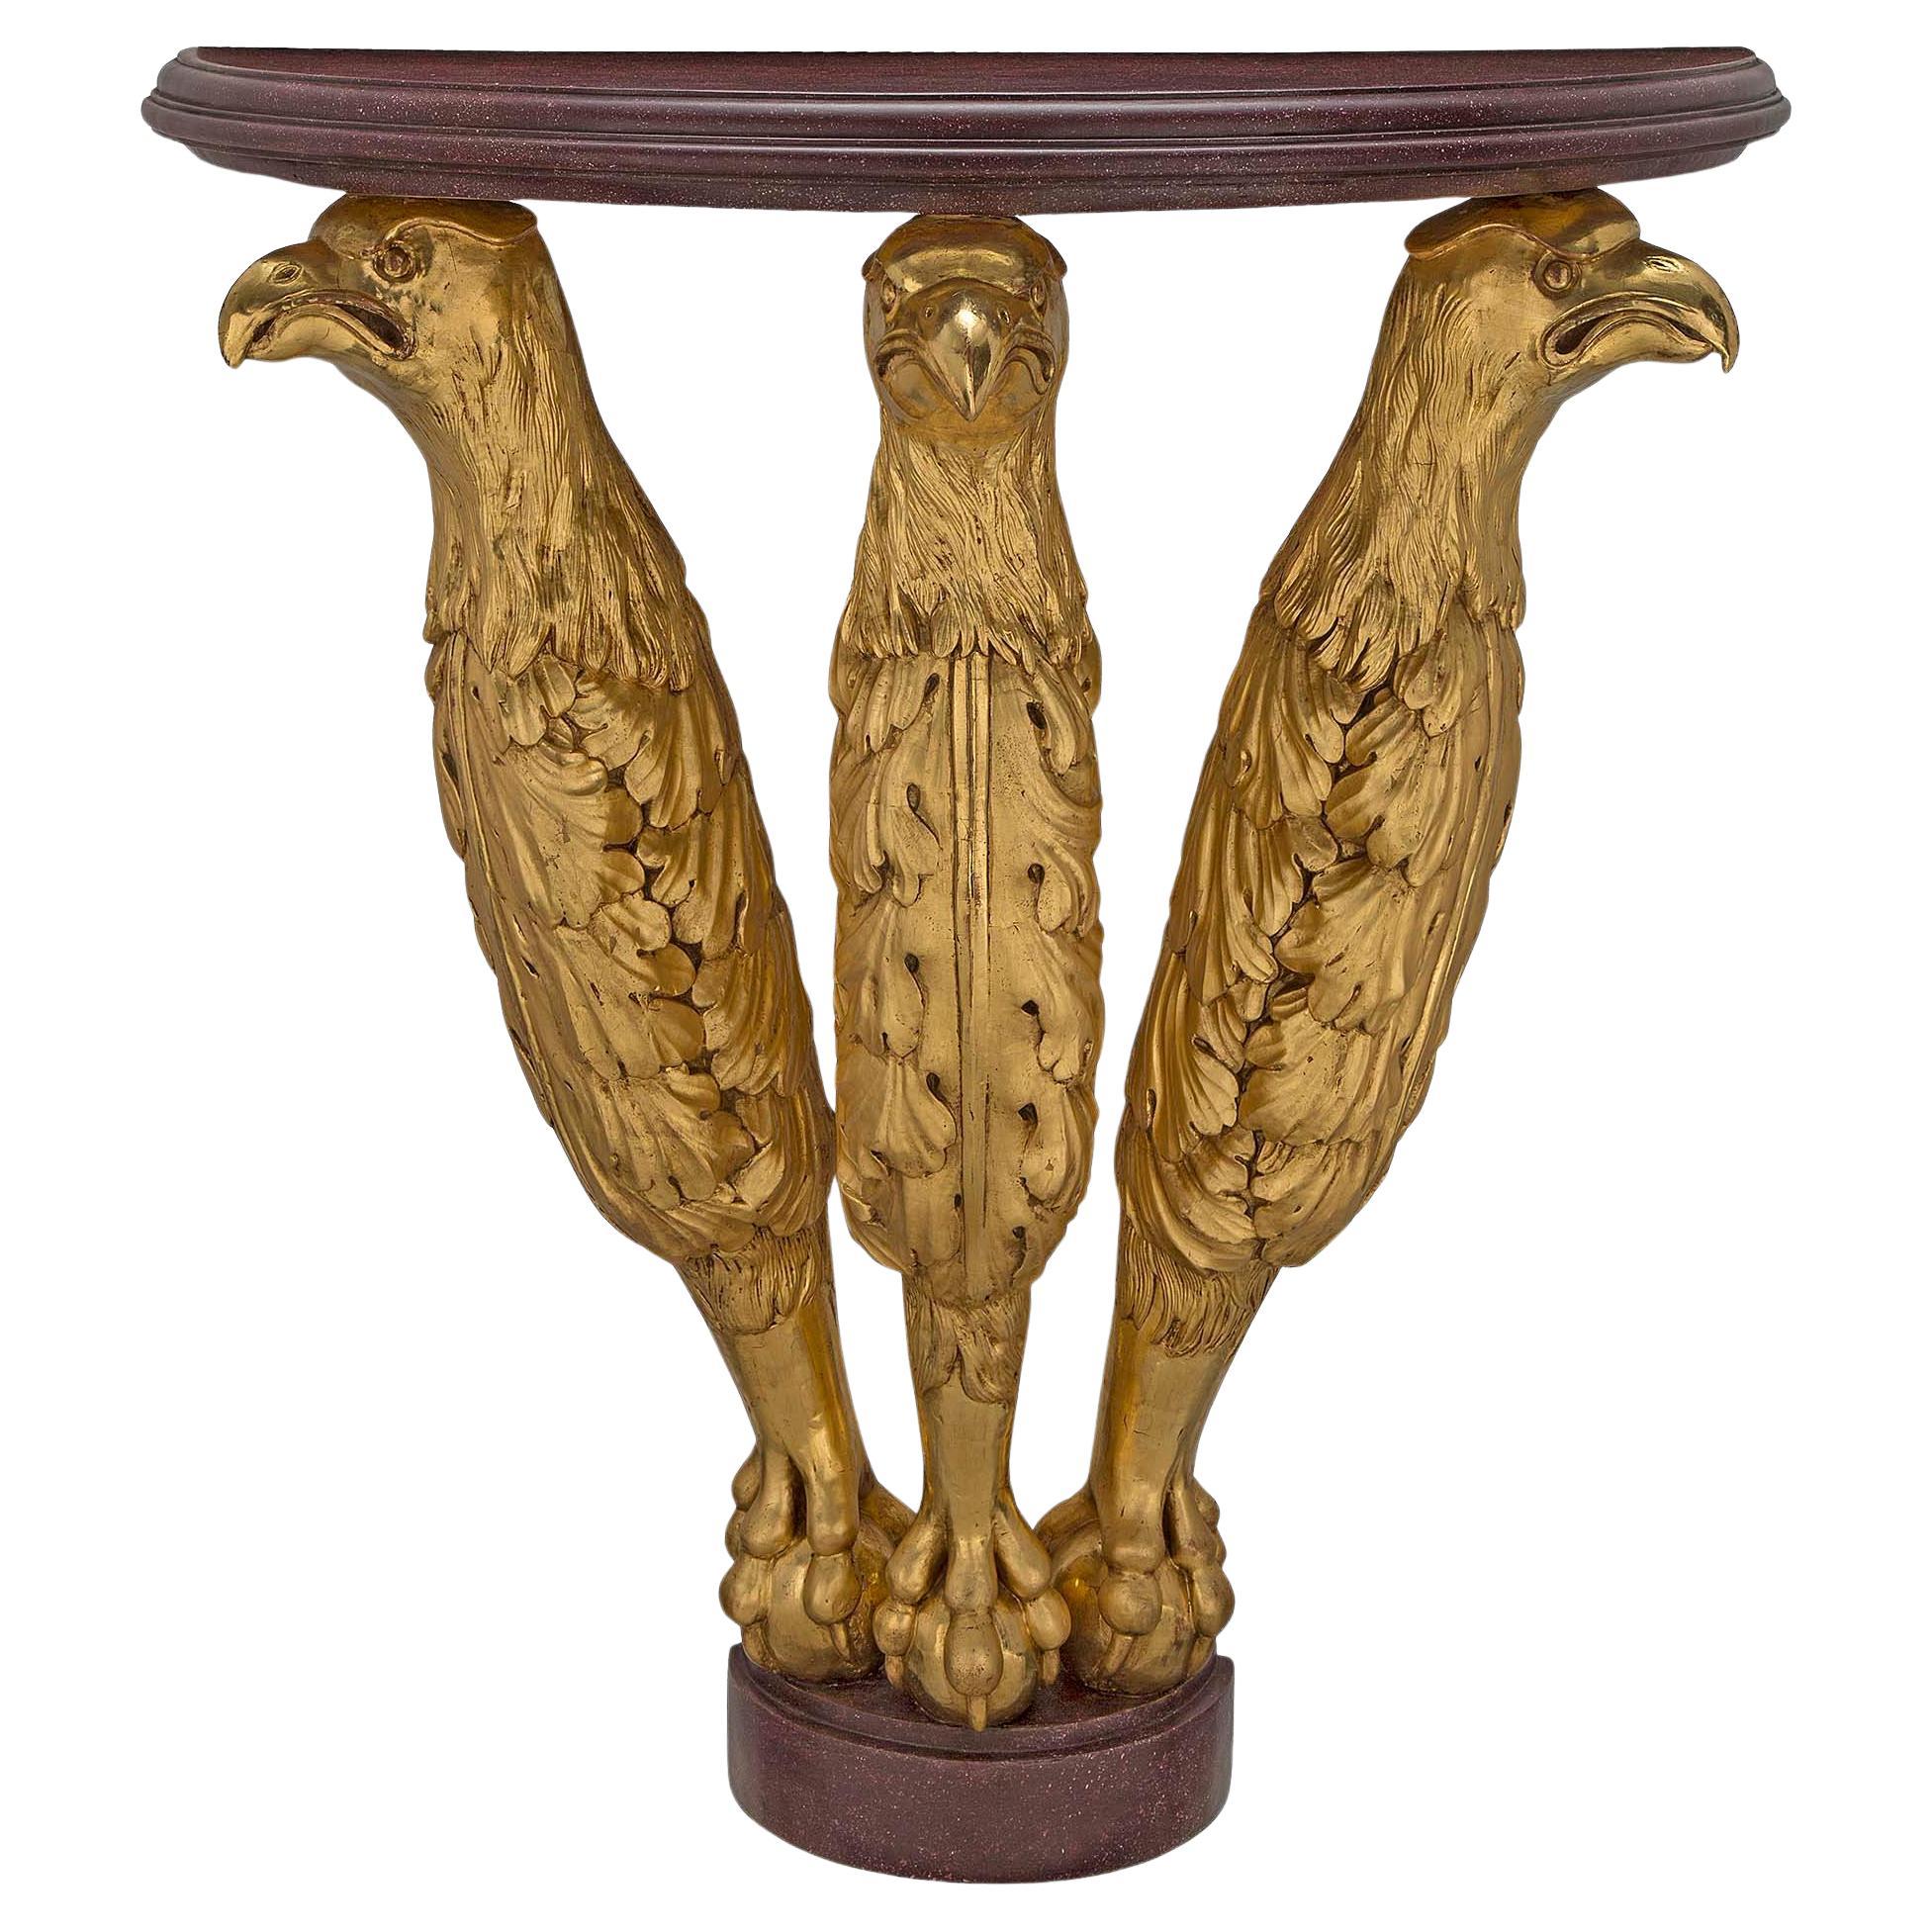 Austrian Early 19th Century Neoclassical Style Giltwood Demilune Console For Sale